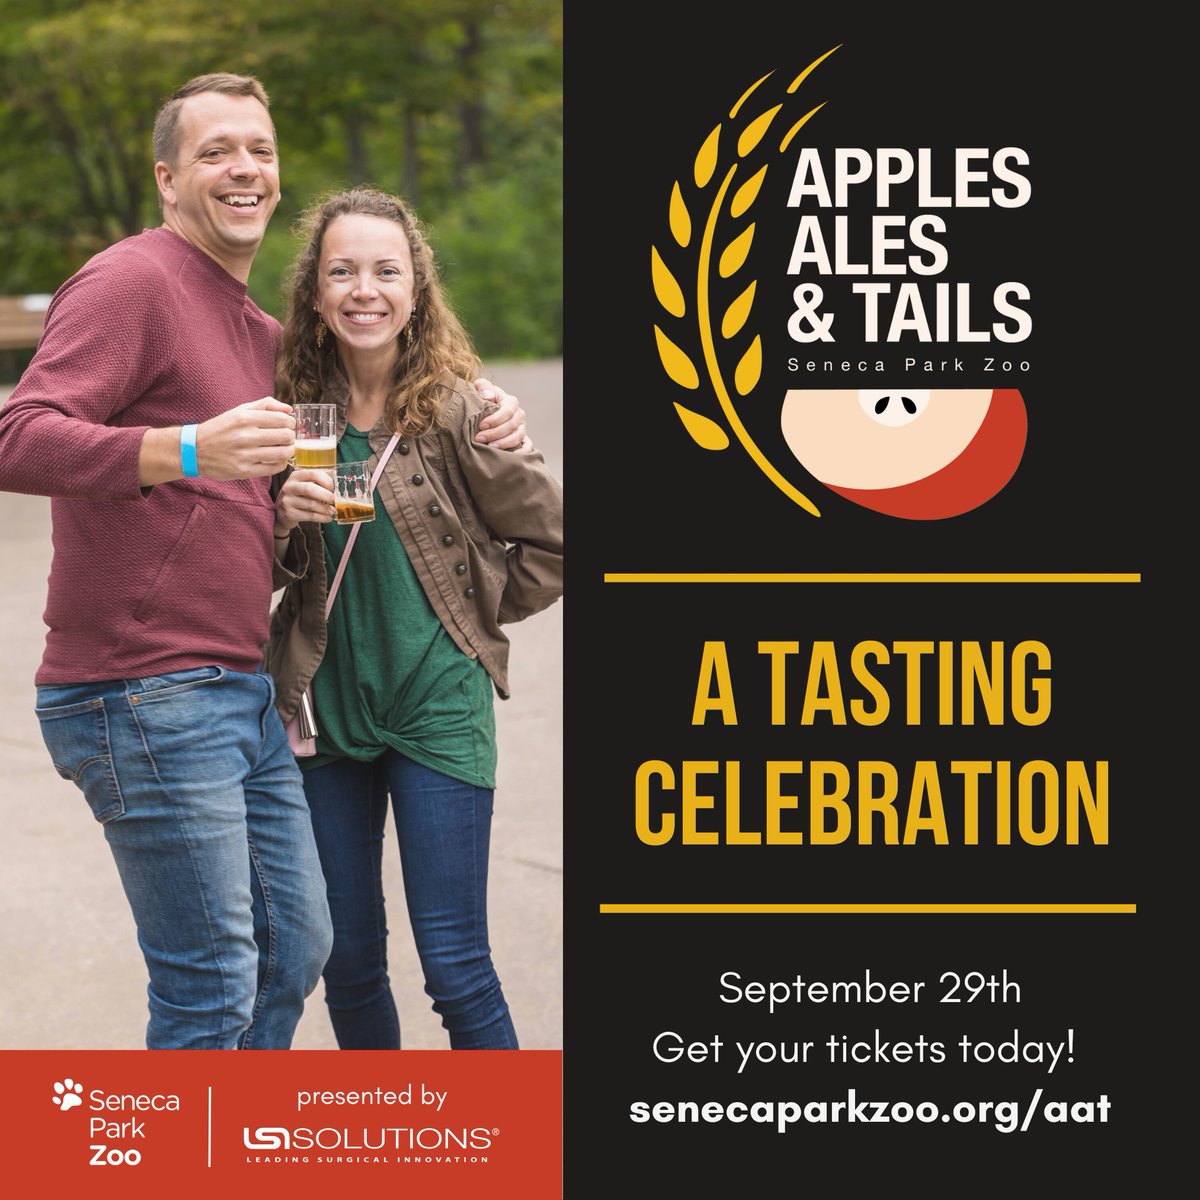 Just two days away from the fall event you don't want to miss! 🍂🍻🍎 senecaparkzoo.org/aat/ - Craft Beer & Ciders - Appetizer Stations - Exclusive 5 oz. Souvenir Cup - Amazing Animals - Beautiful Backdrop - Conservation & Animal Programming Experiences